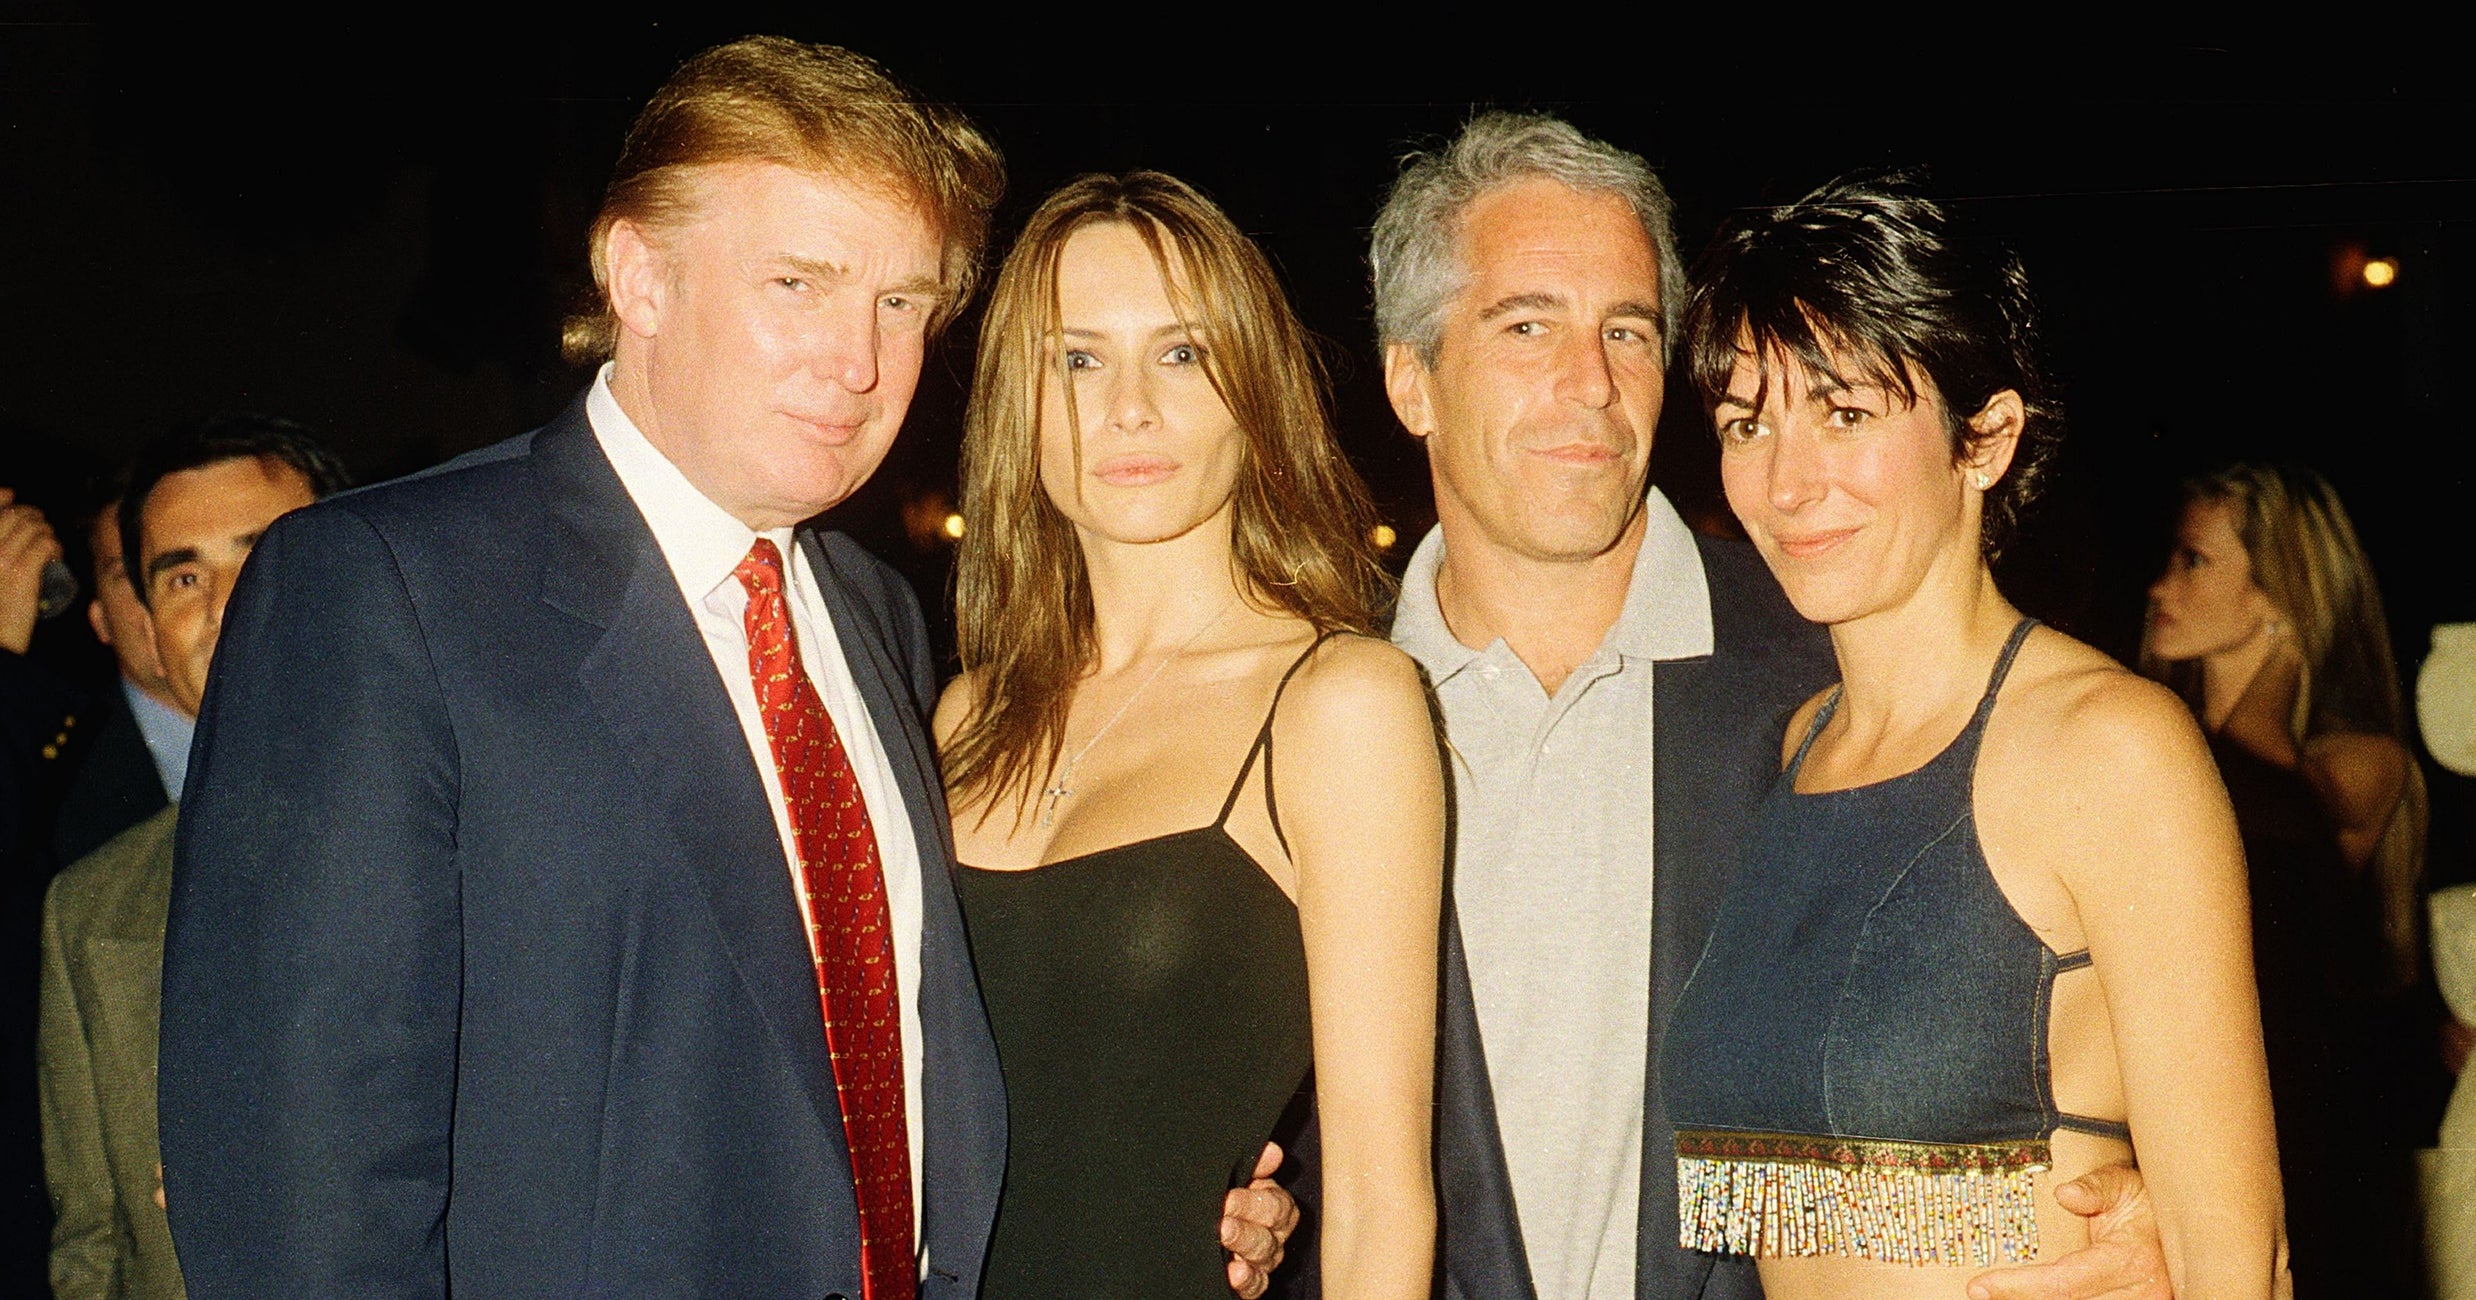 Twitter Asks Why Trump Wished Ghislaine Maxwell Well